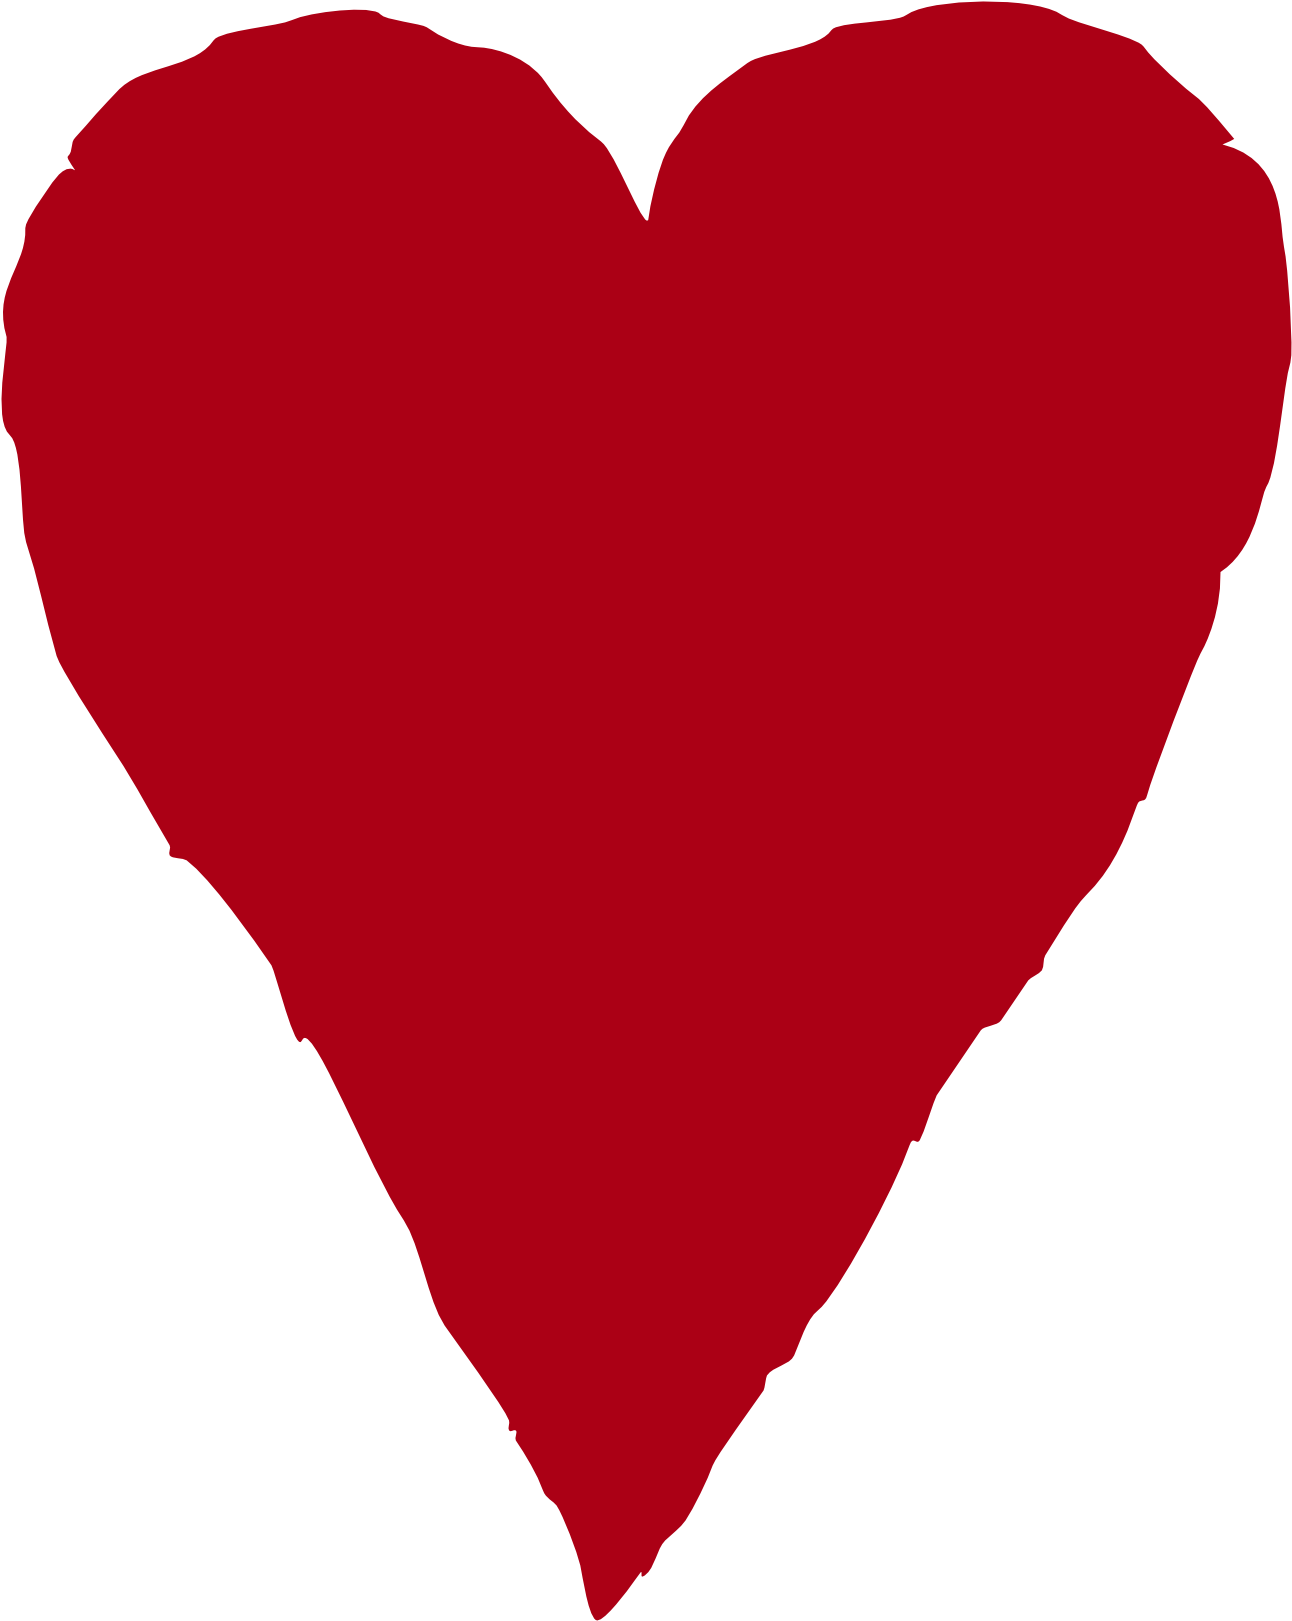 Primitive Heart With Arrow Clipart - Red Heart Illustration (1969x1959)